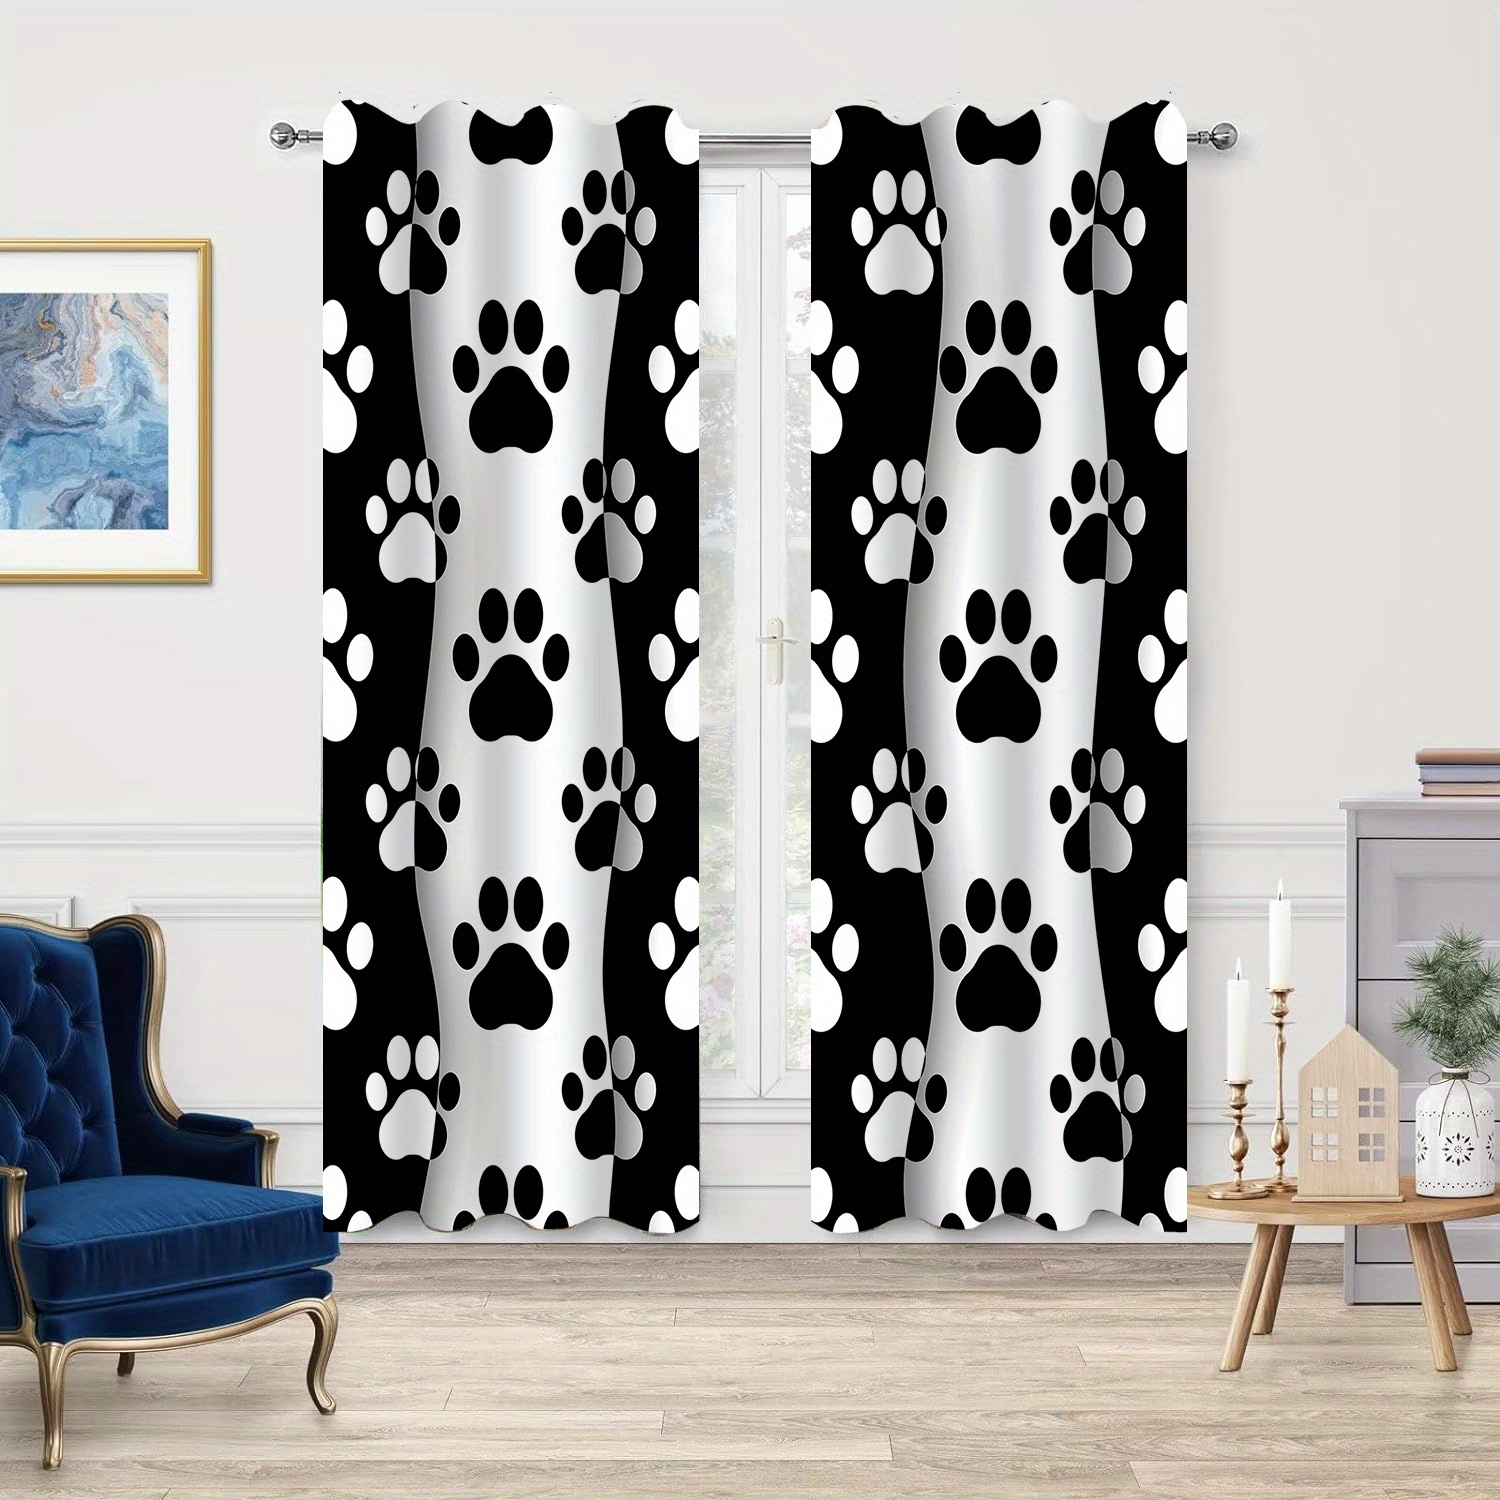 

2-piece Set Of Light Blocking Curtains - Uv Resistant Polyester With Chic Paw Print Design, Perfect For Living Room, Bedroom, Kitchen & Farmhouse Decor Curtains For Living Room Curtains For Bedroom